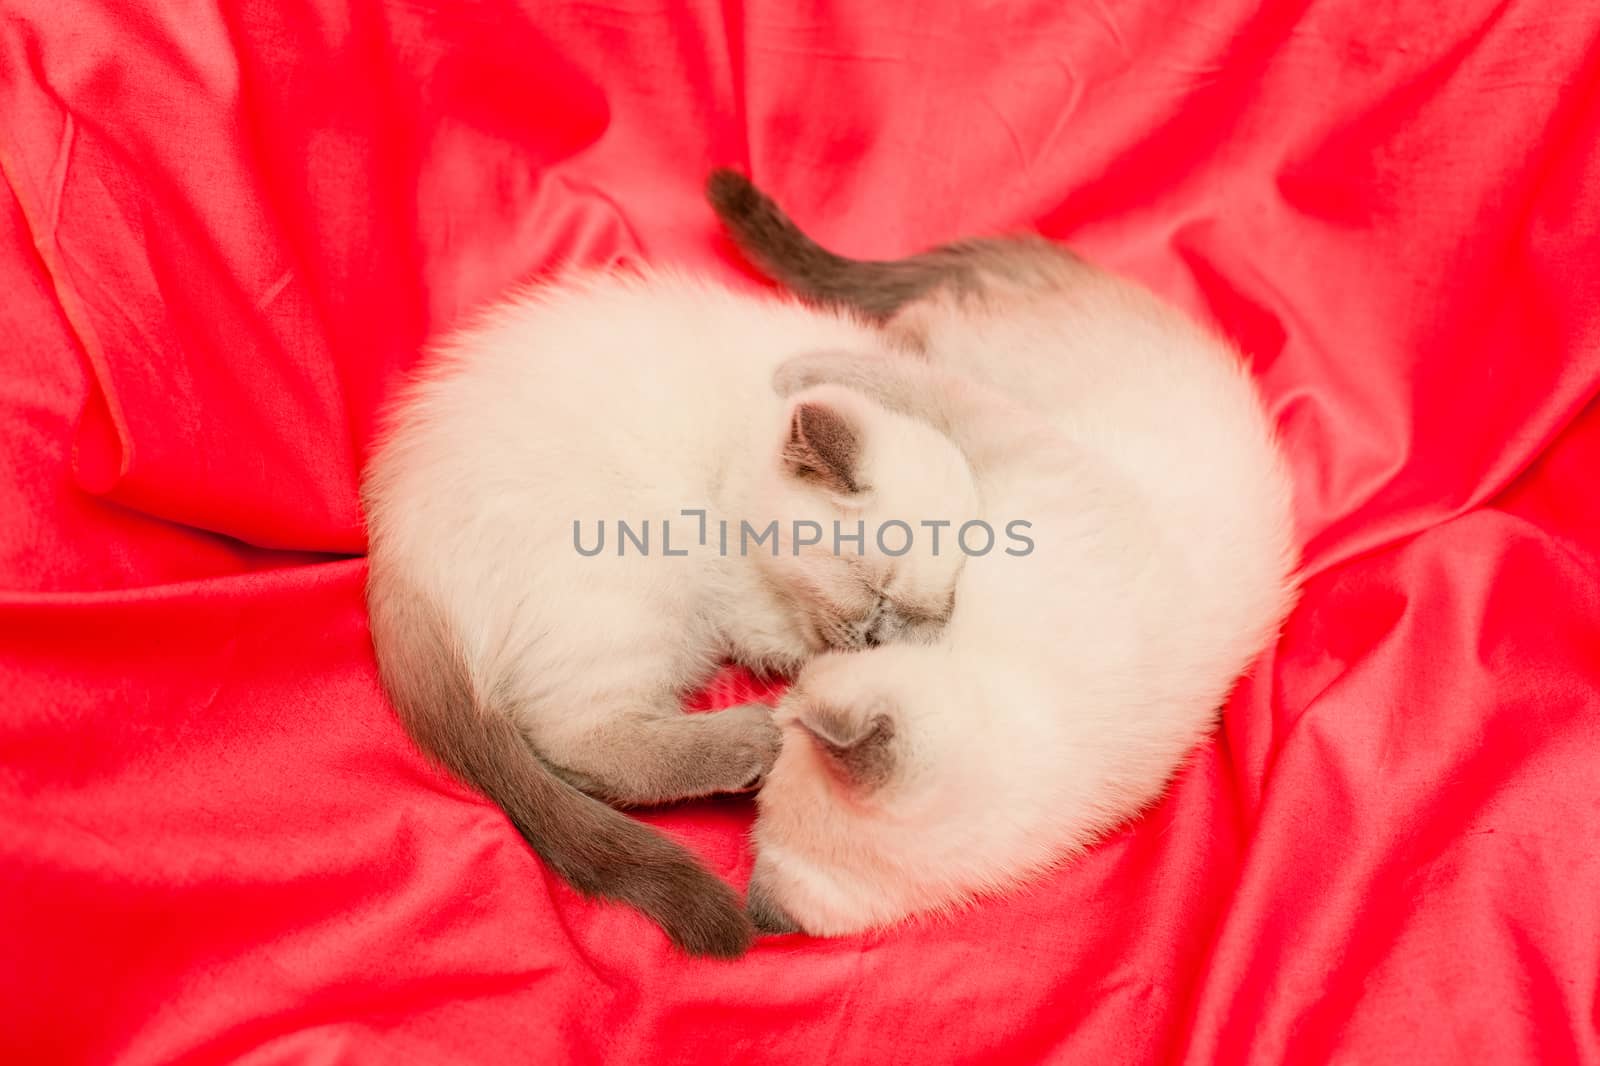 White and grey kittens by foaloce